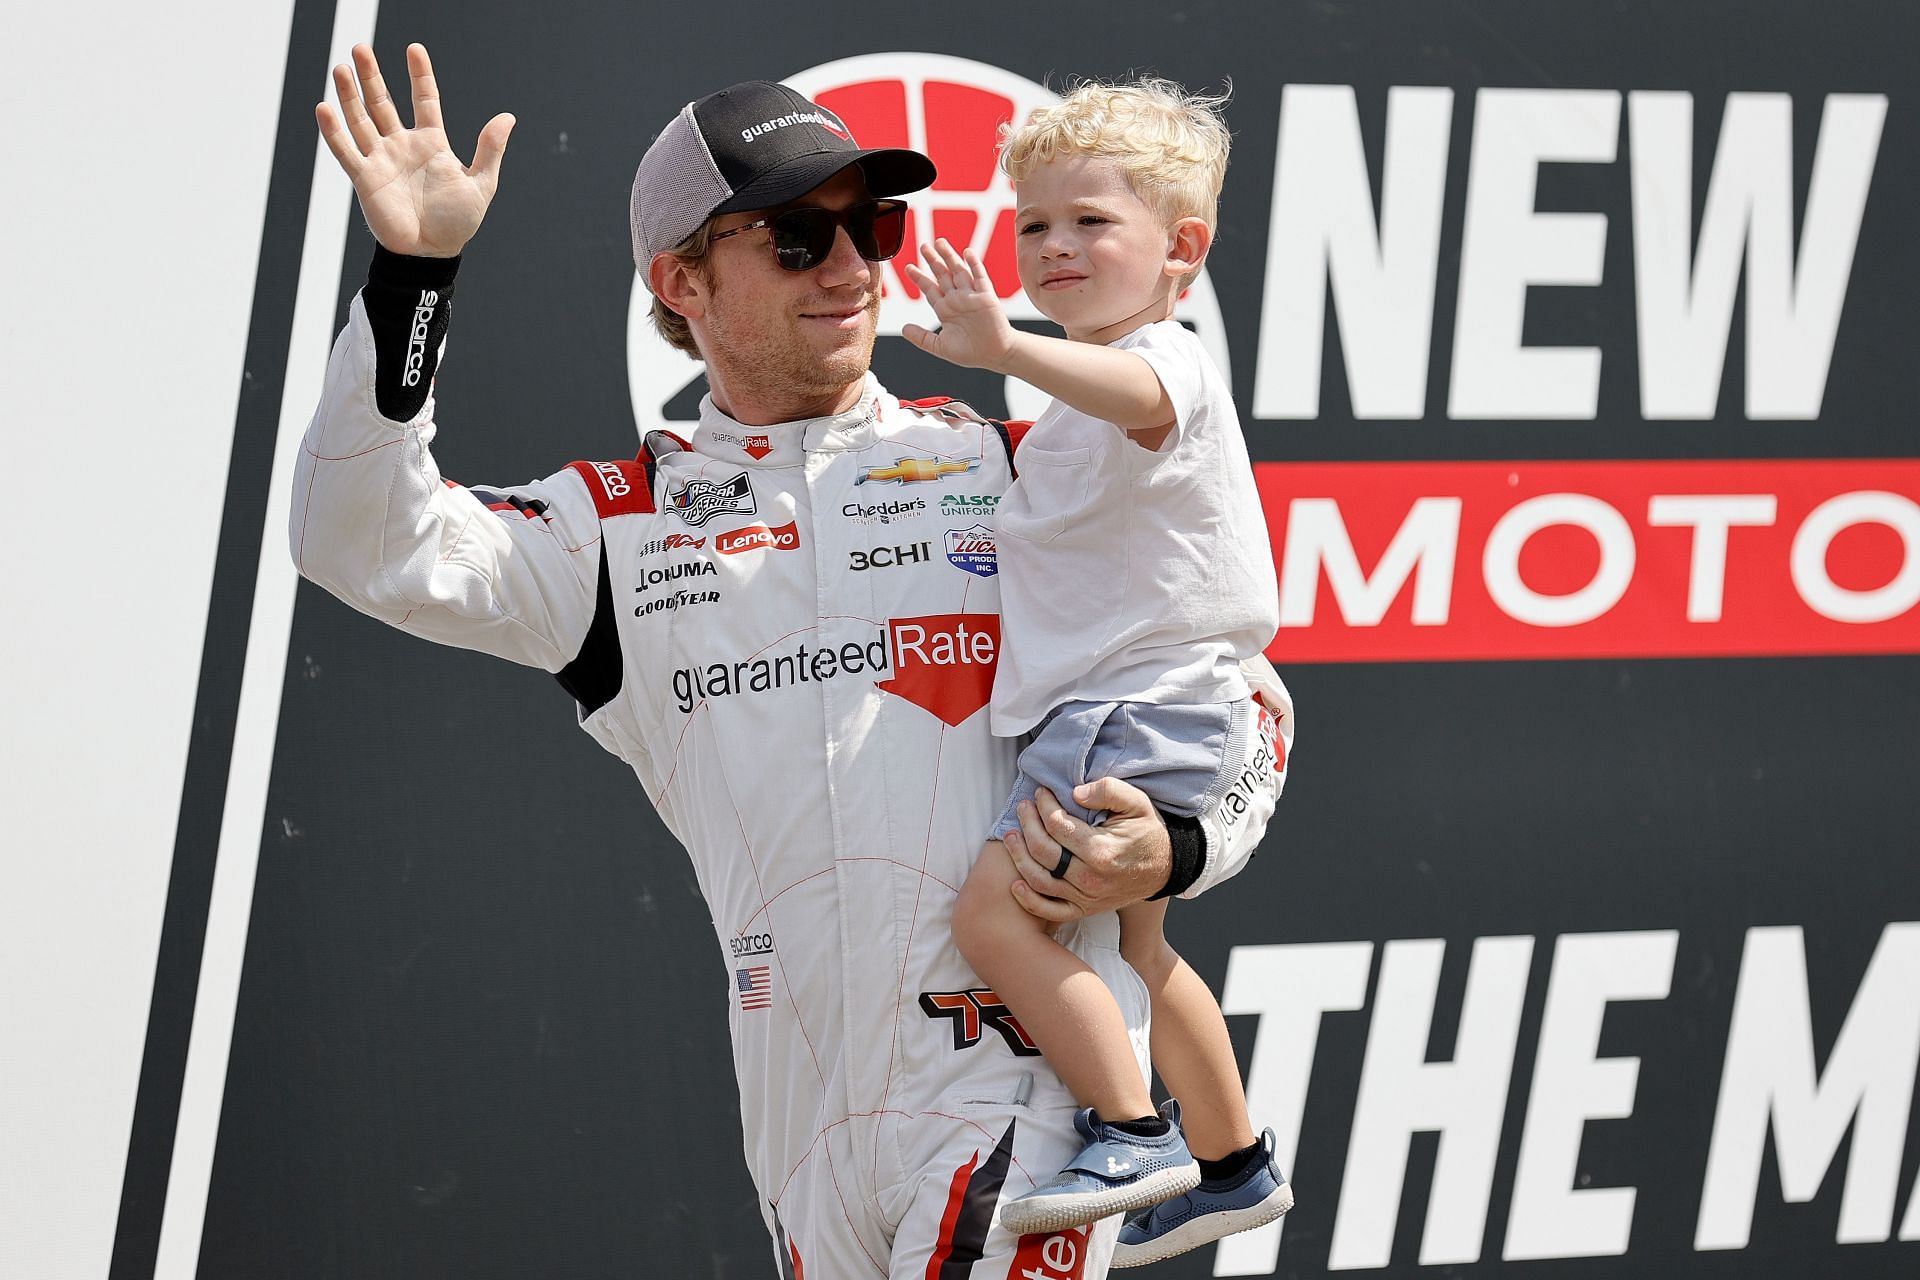 Tyler Reddick waves to fans as he walks onstage with his son, Beau during driver intros before the 2022 NASCAR Cup Series Ambetter 301 at New Hampshire Motor Speedway in Loudon, New Hampshire. (Photo by Tim Nwachukwu/Getty Images)